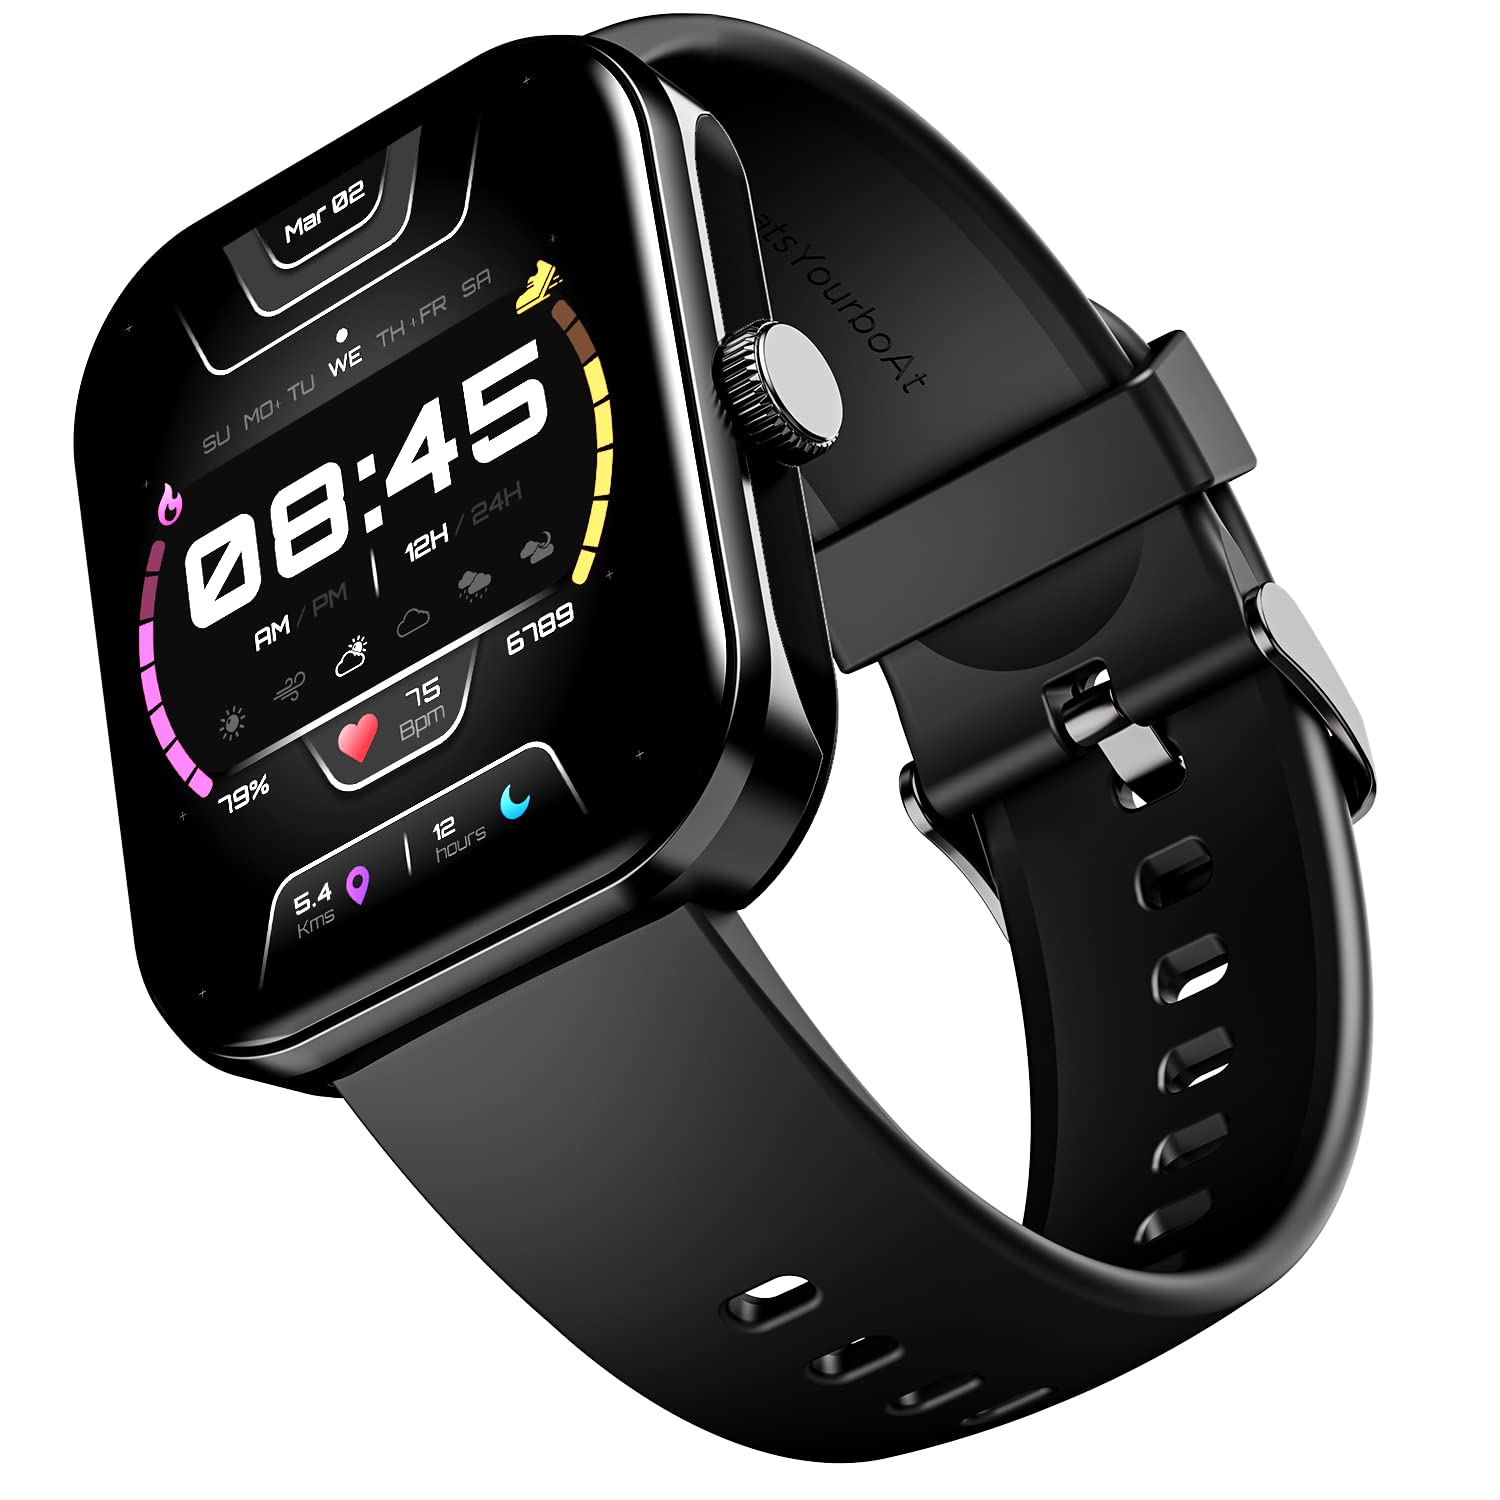 https://www.zebrs.com/uploads/zebrs/products/boat-ultima-call-max-smart-watch-with-2quot-big-hd-display-advanced-bt-calling-100-sports-modes-10-days-battery-life-multiple-watch-faces-ip68-hr-amp-spo2-sedentary-alertsactive-black-801481_l.jpg?v=337